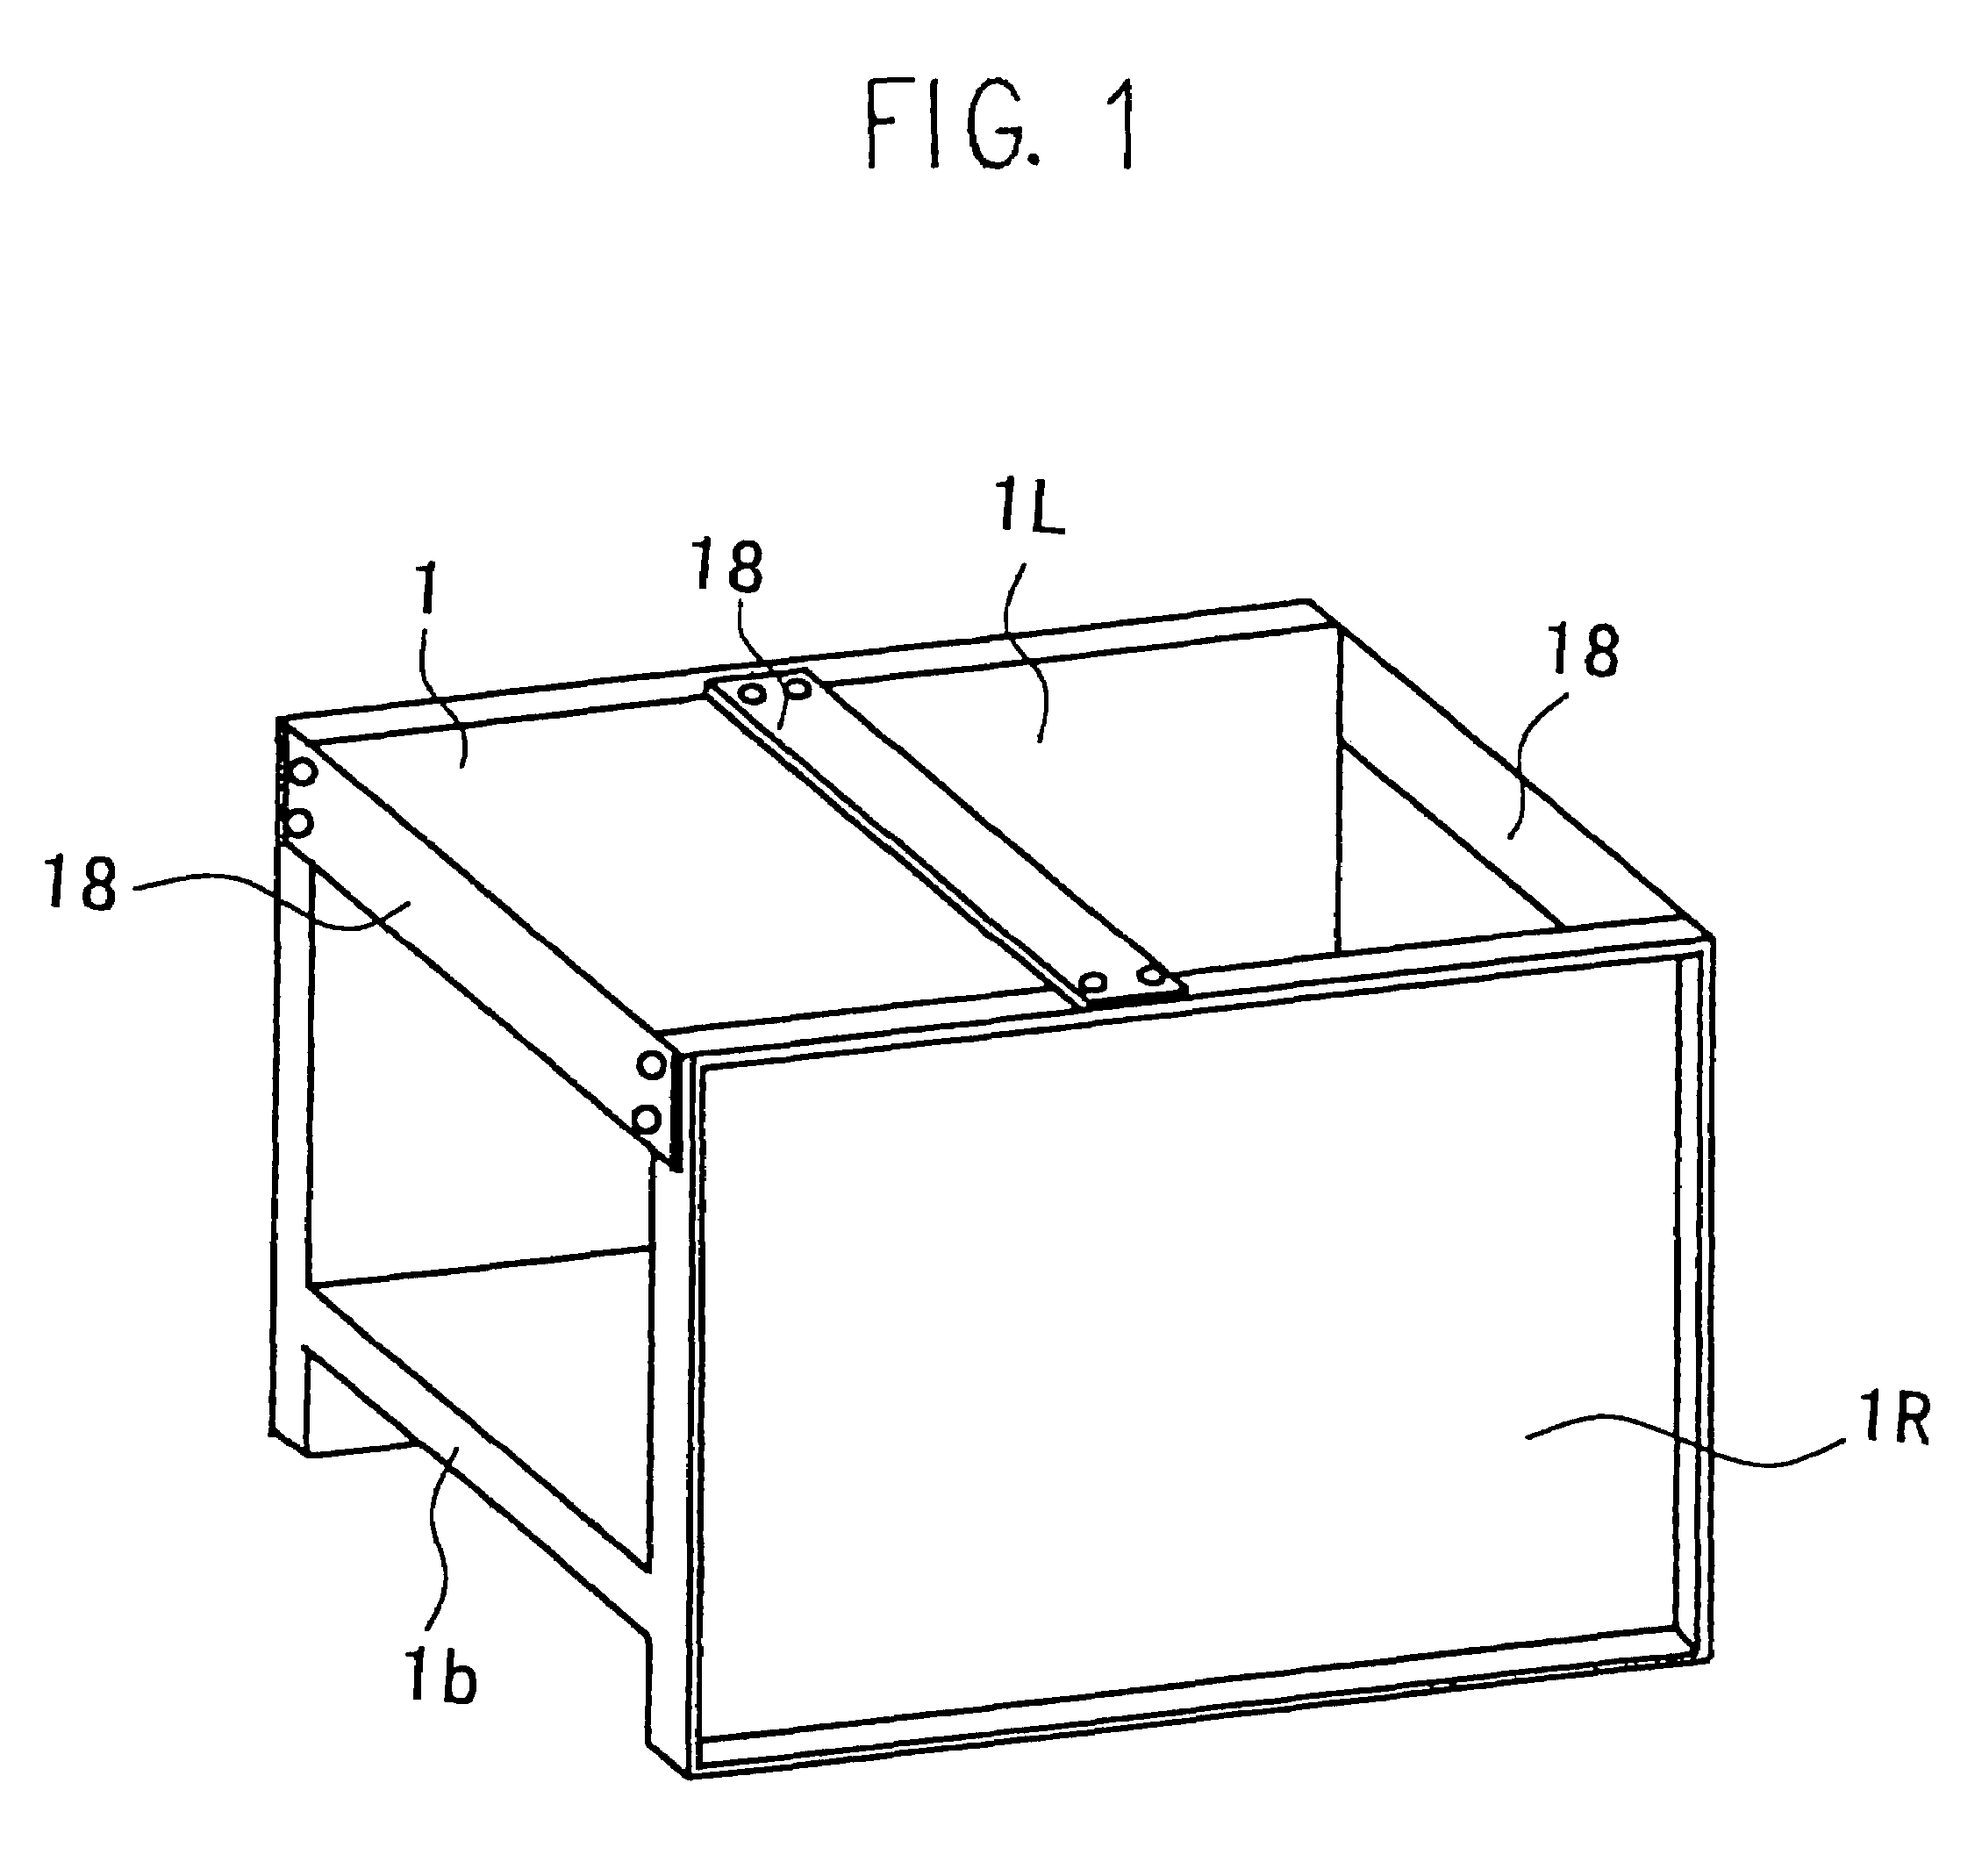 Image forming apparatus including structural frame